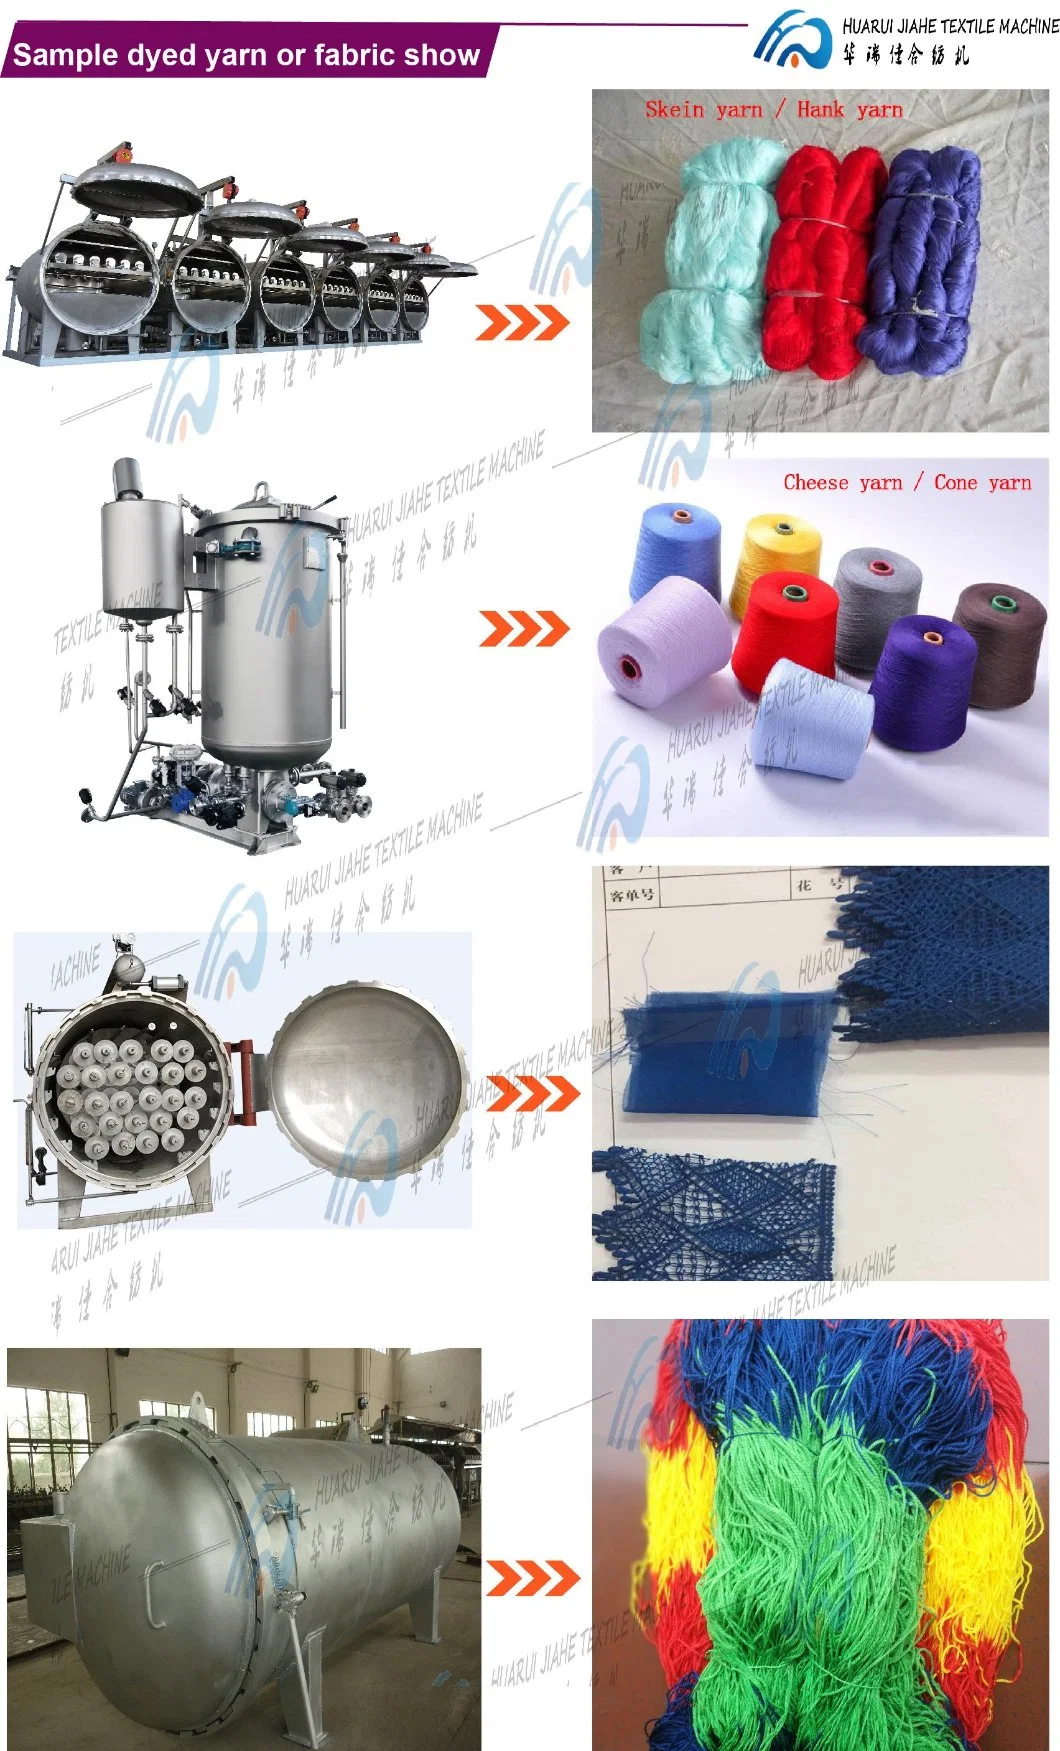 Overflow Jet Textile Dyeing Machine in Nigeria, Tukey, Vietnam, Automatic Yarn Conditioning Machine for Skein Dyed Yarn Absolutely No Fluffing, Tangled Yarn,